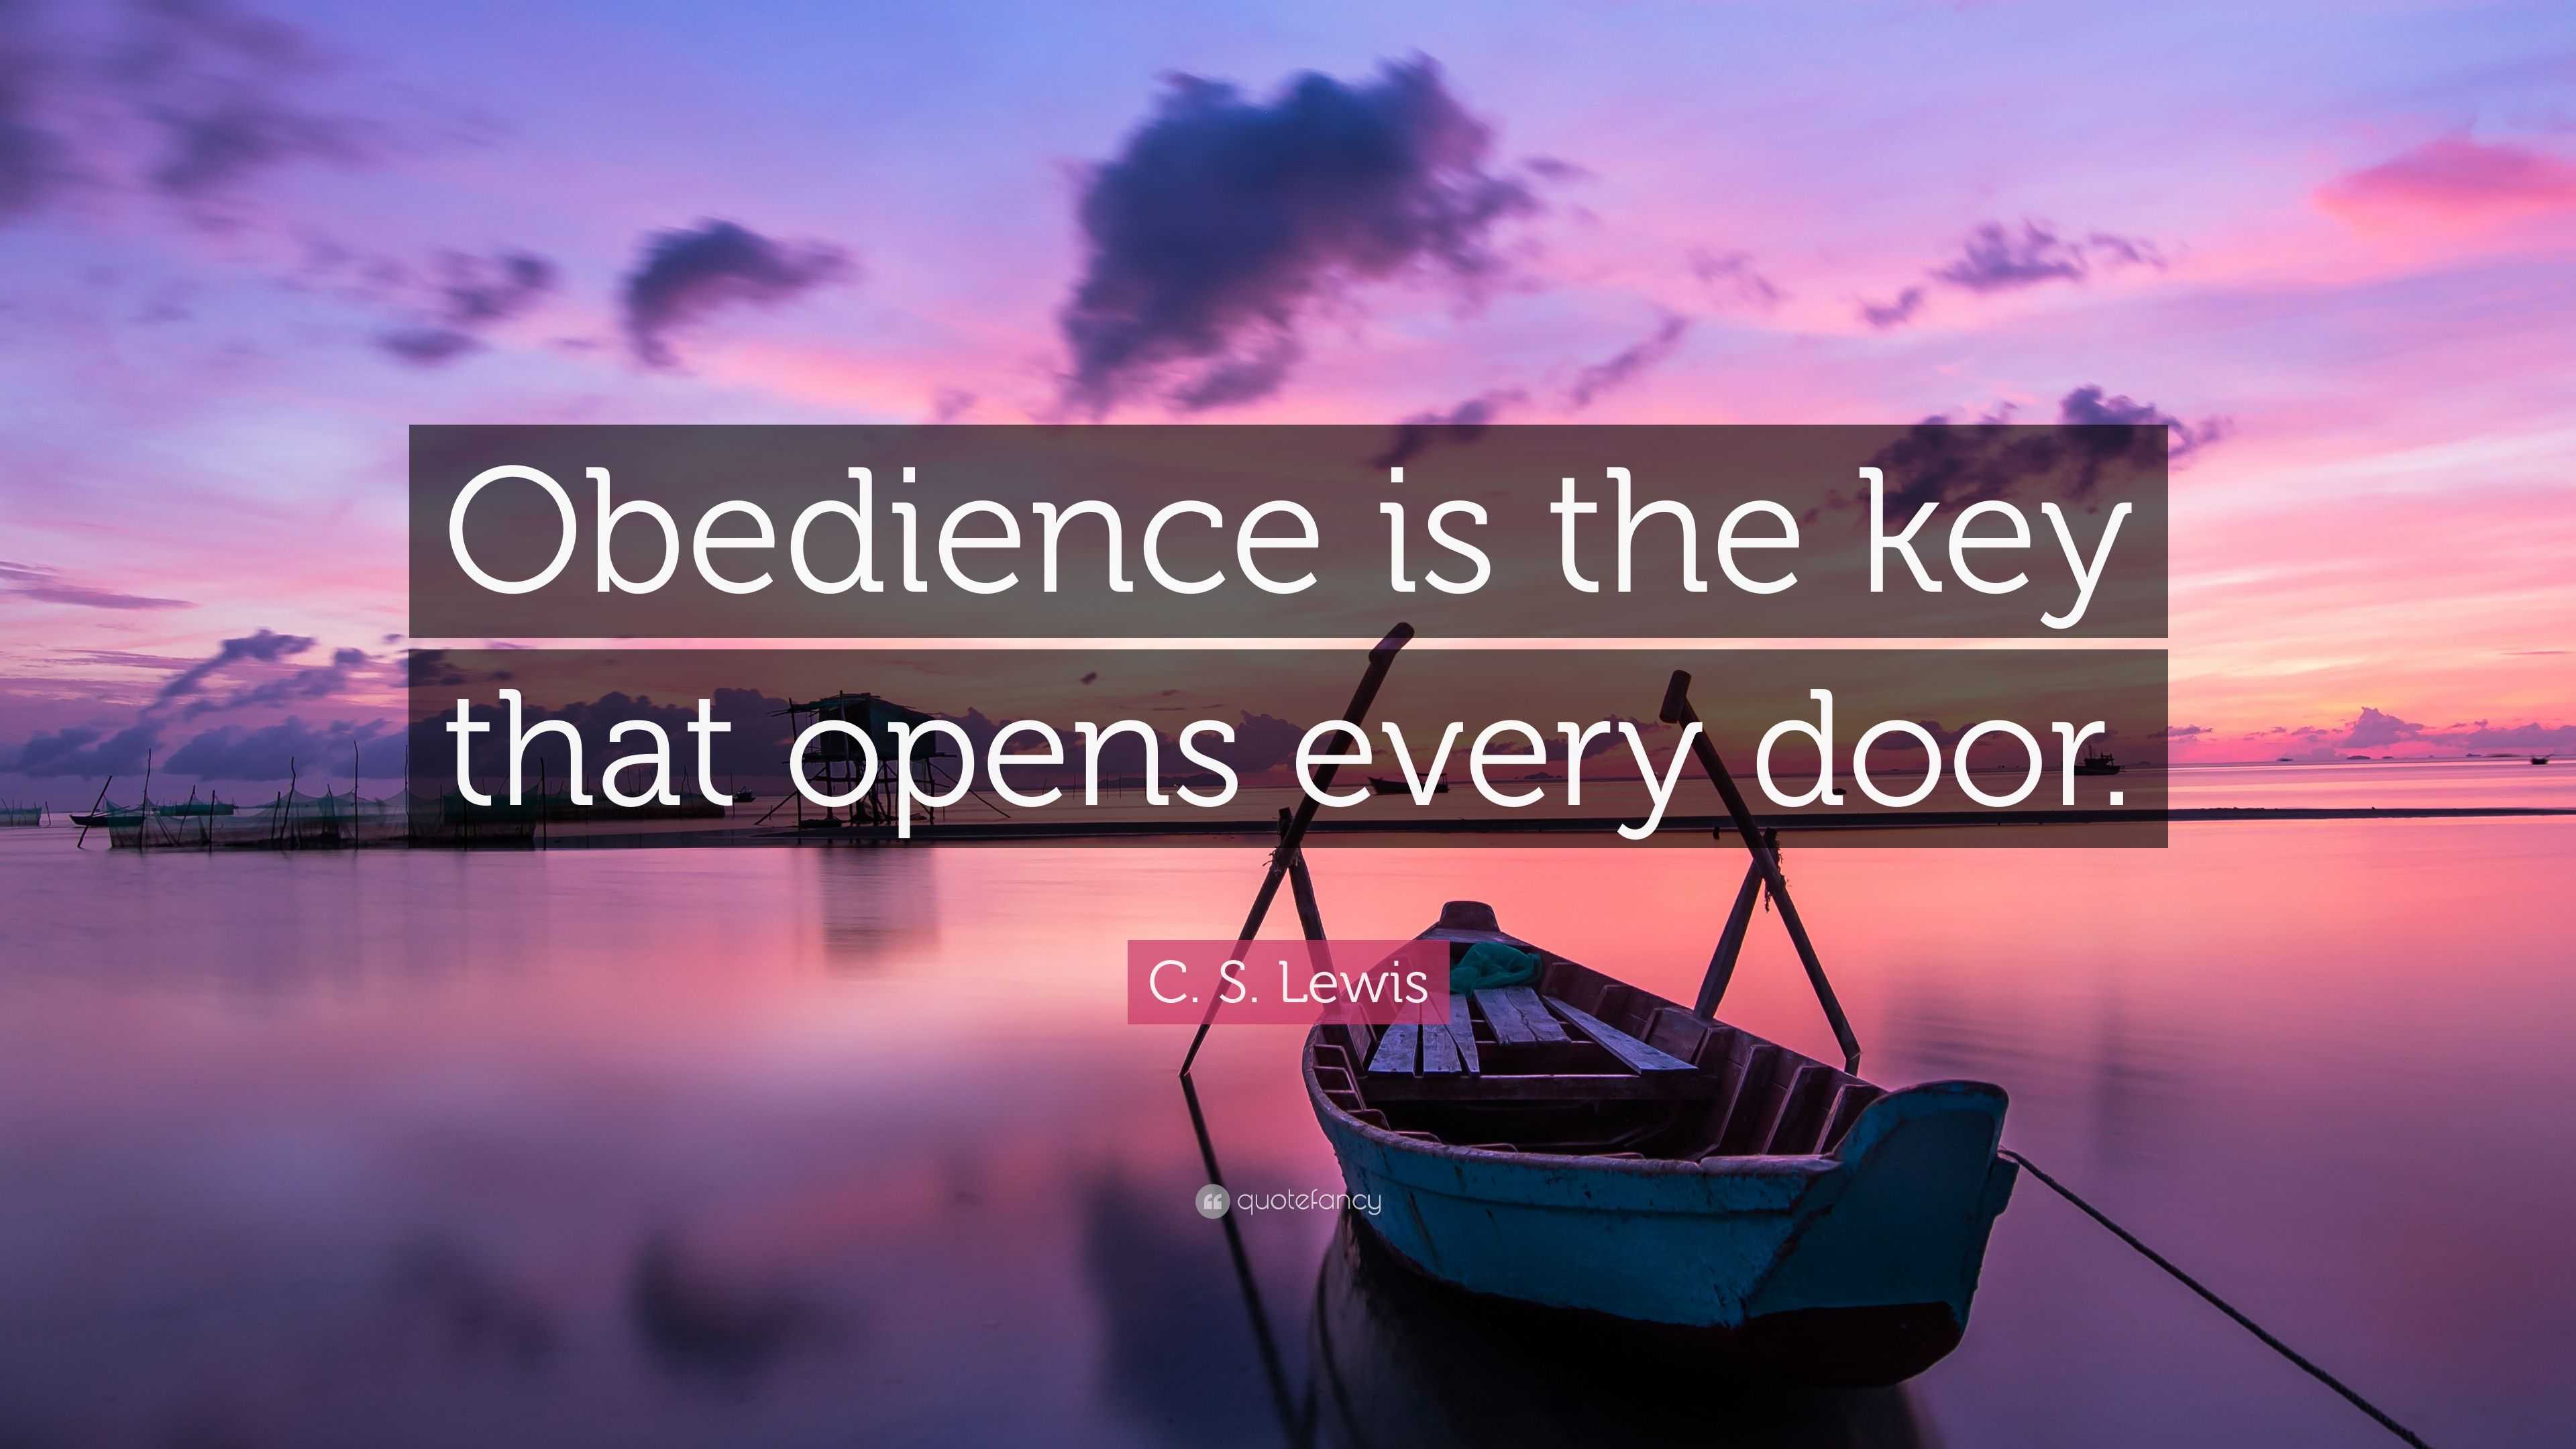 C. S. Lewis Quote: “Obedience is the key that opens every door.”